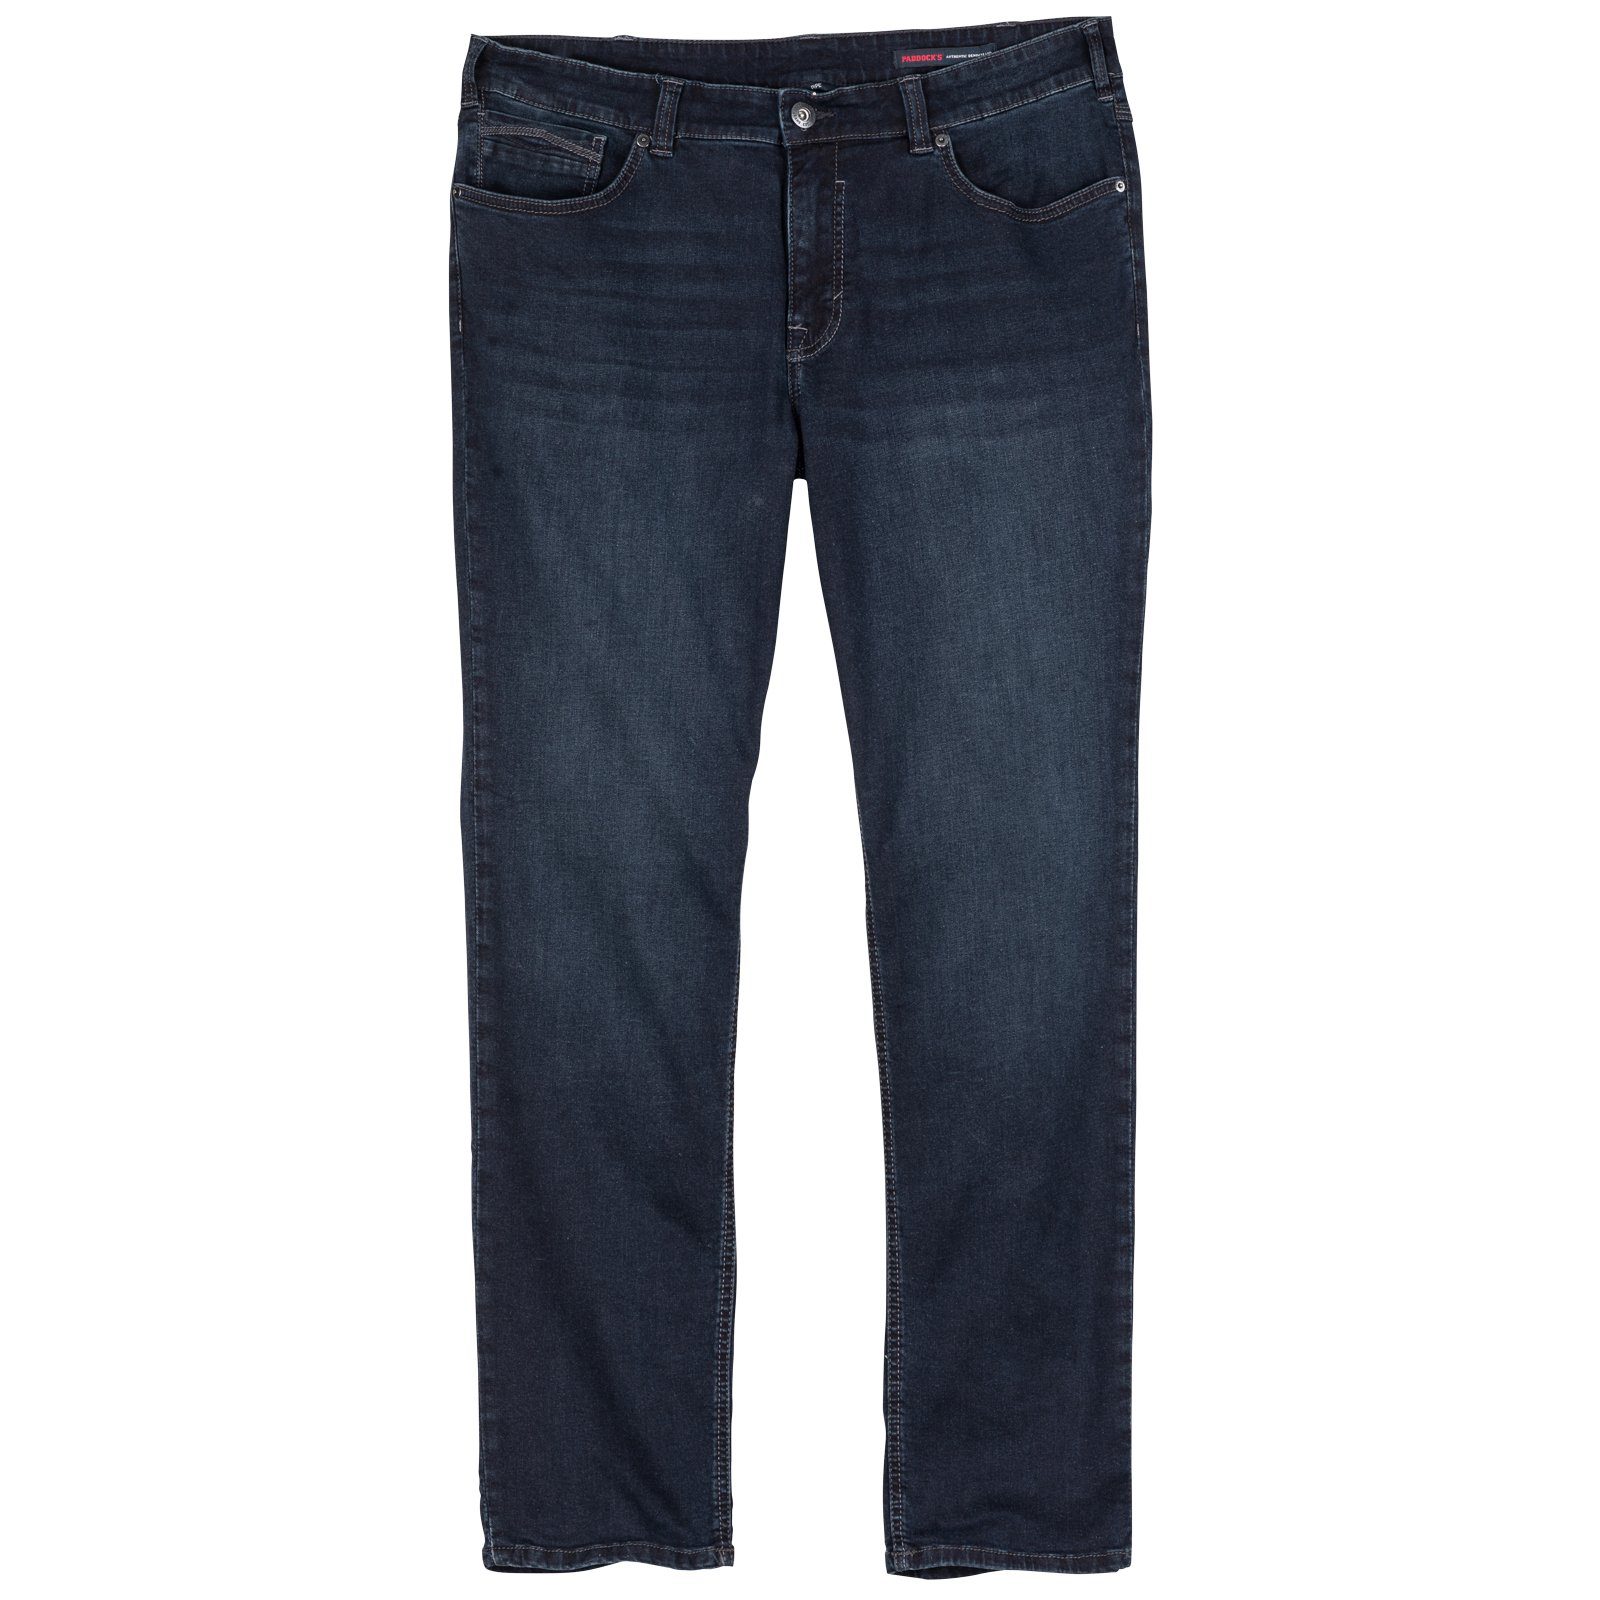 Paddock's Bequeme Jeans black moustache XXL Jeans Paddock's Pipe use blue